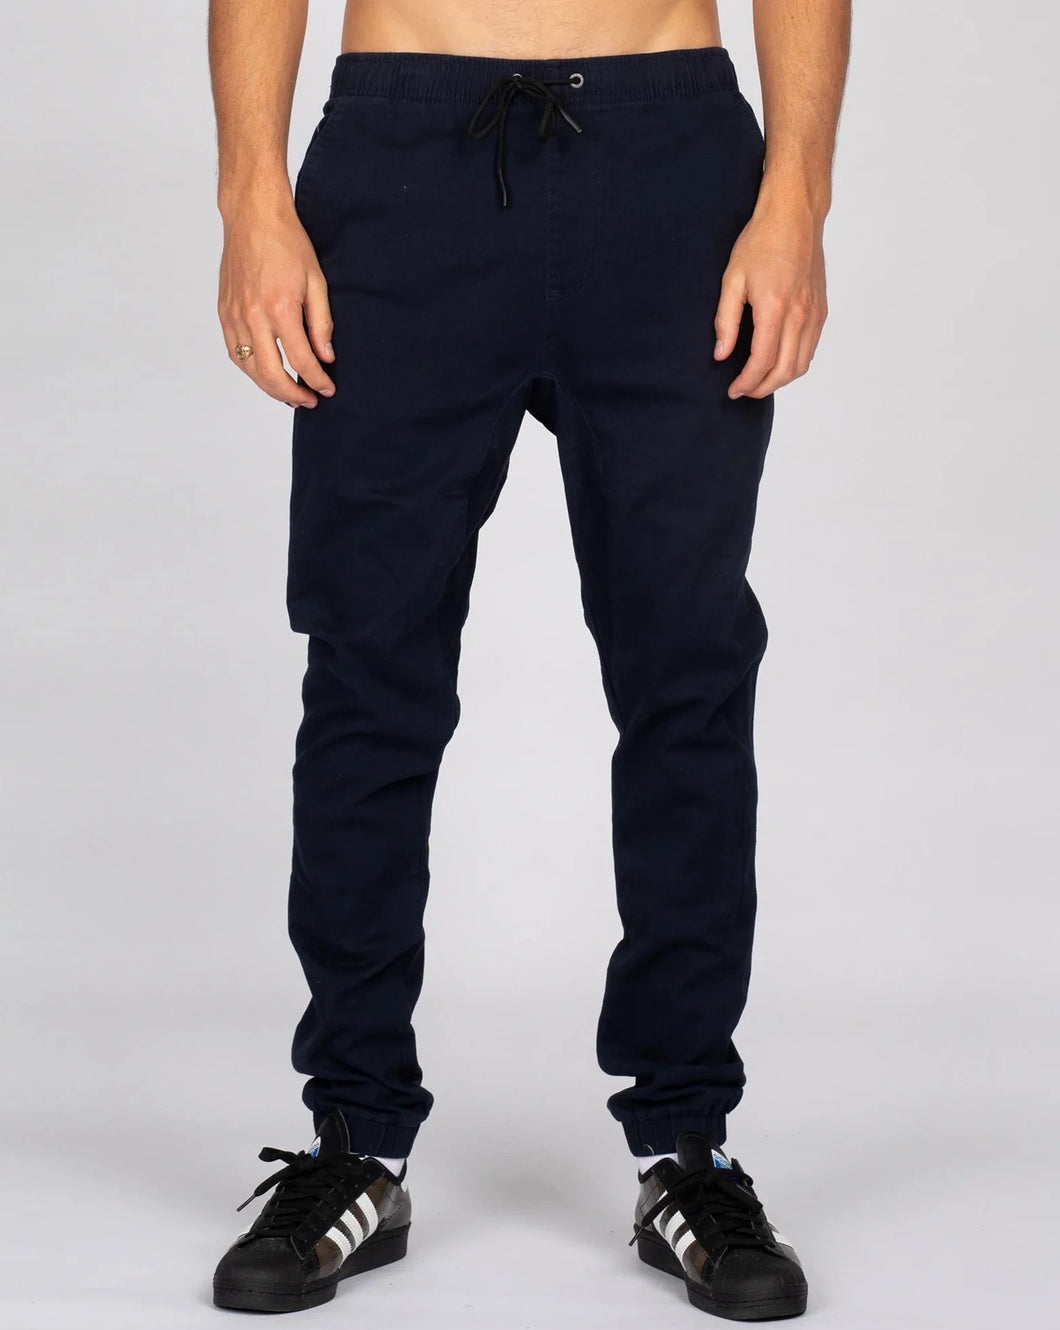 HOOK OUT ELASTIC PANT - NAVY BLUE